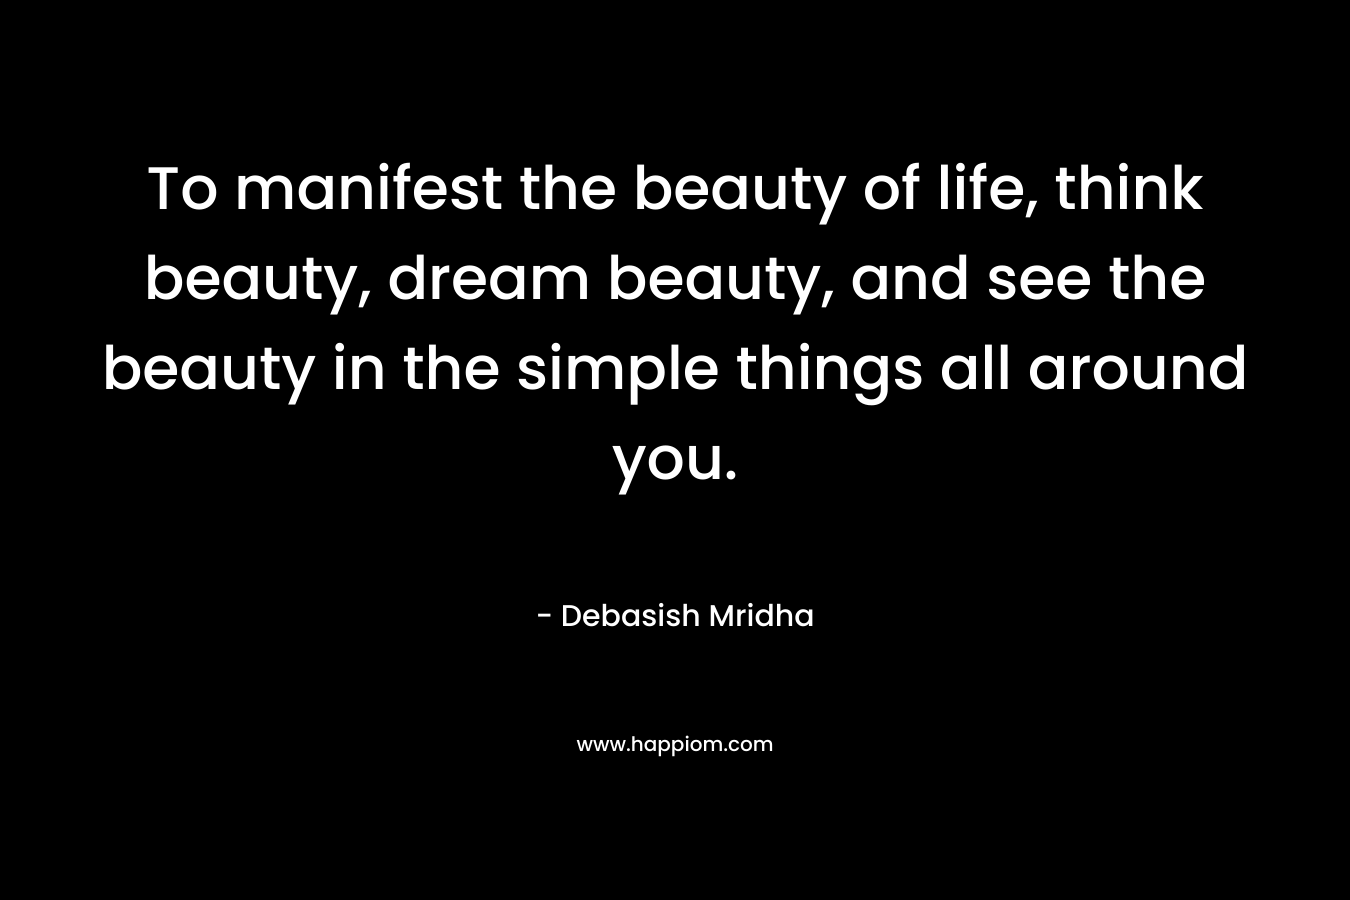 To manifest the beauty of life, think beauty, dream beauty, and see the beauty in the simple things all around you.